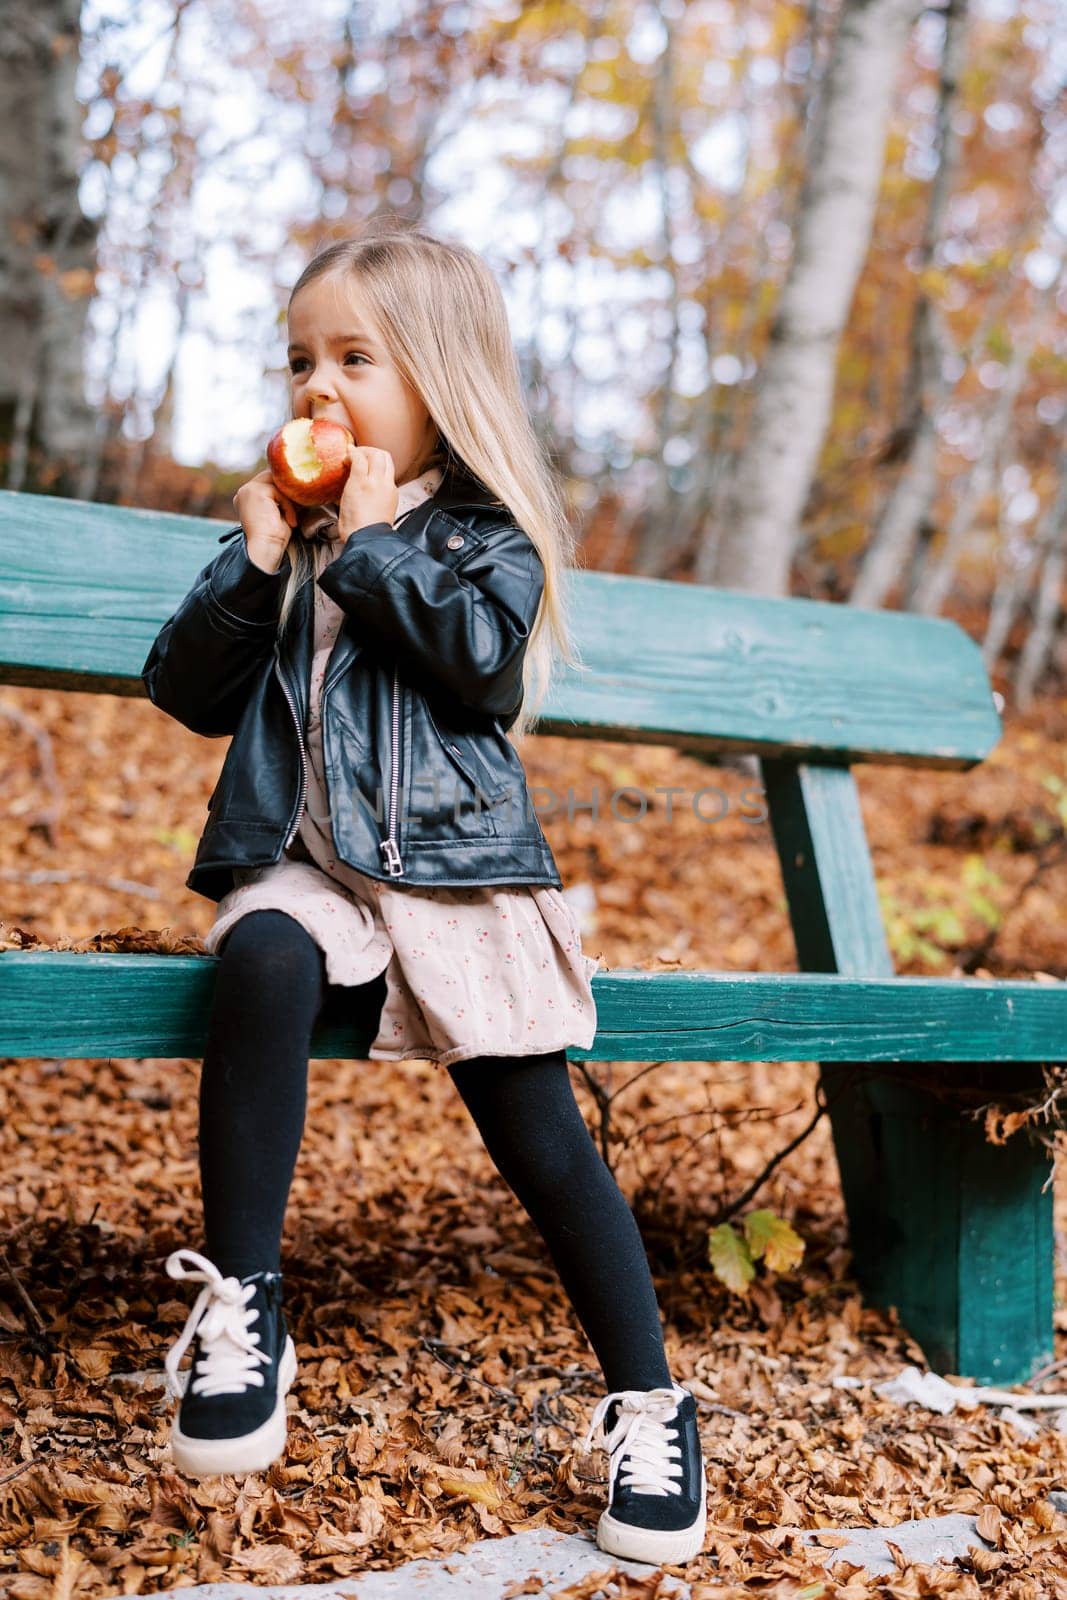 Little girl gnaws an apple while sitting sideways on a wooden bench in the autumn forest. High quality photo